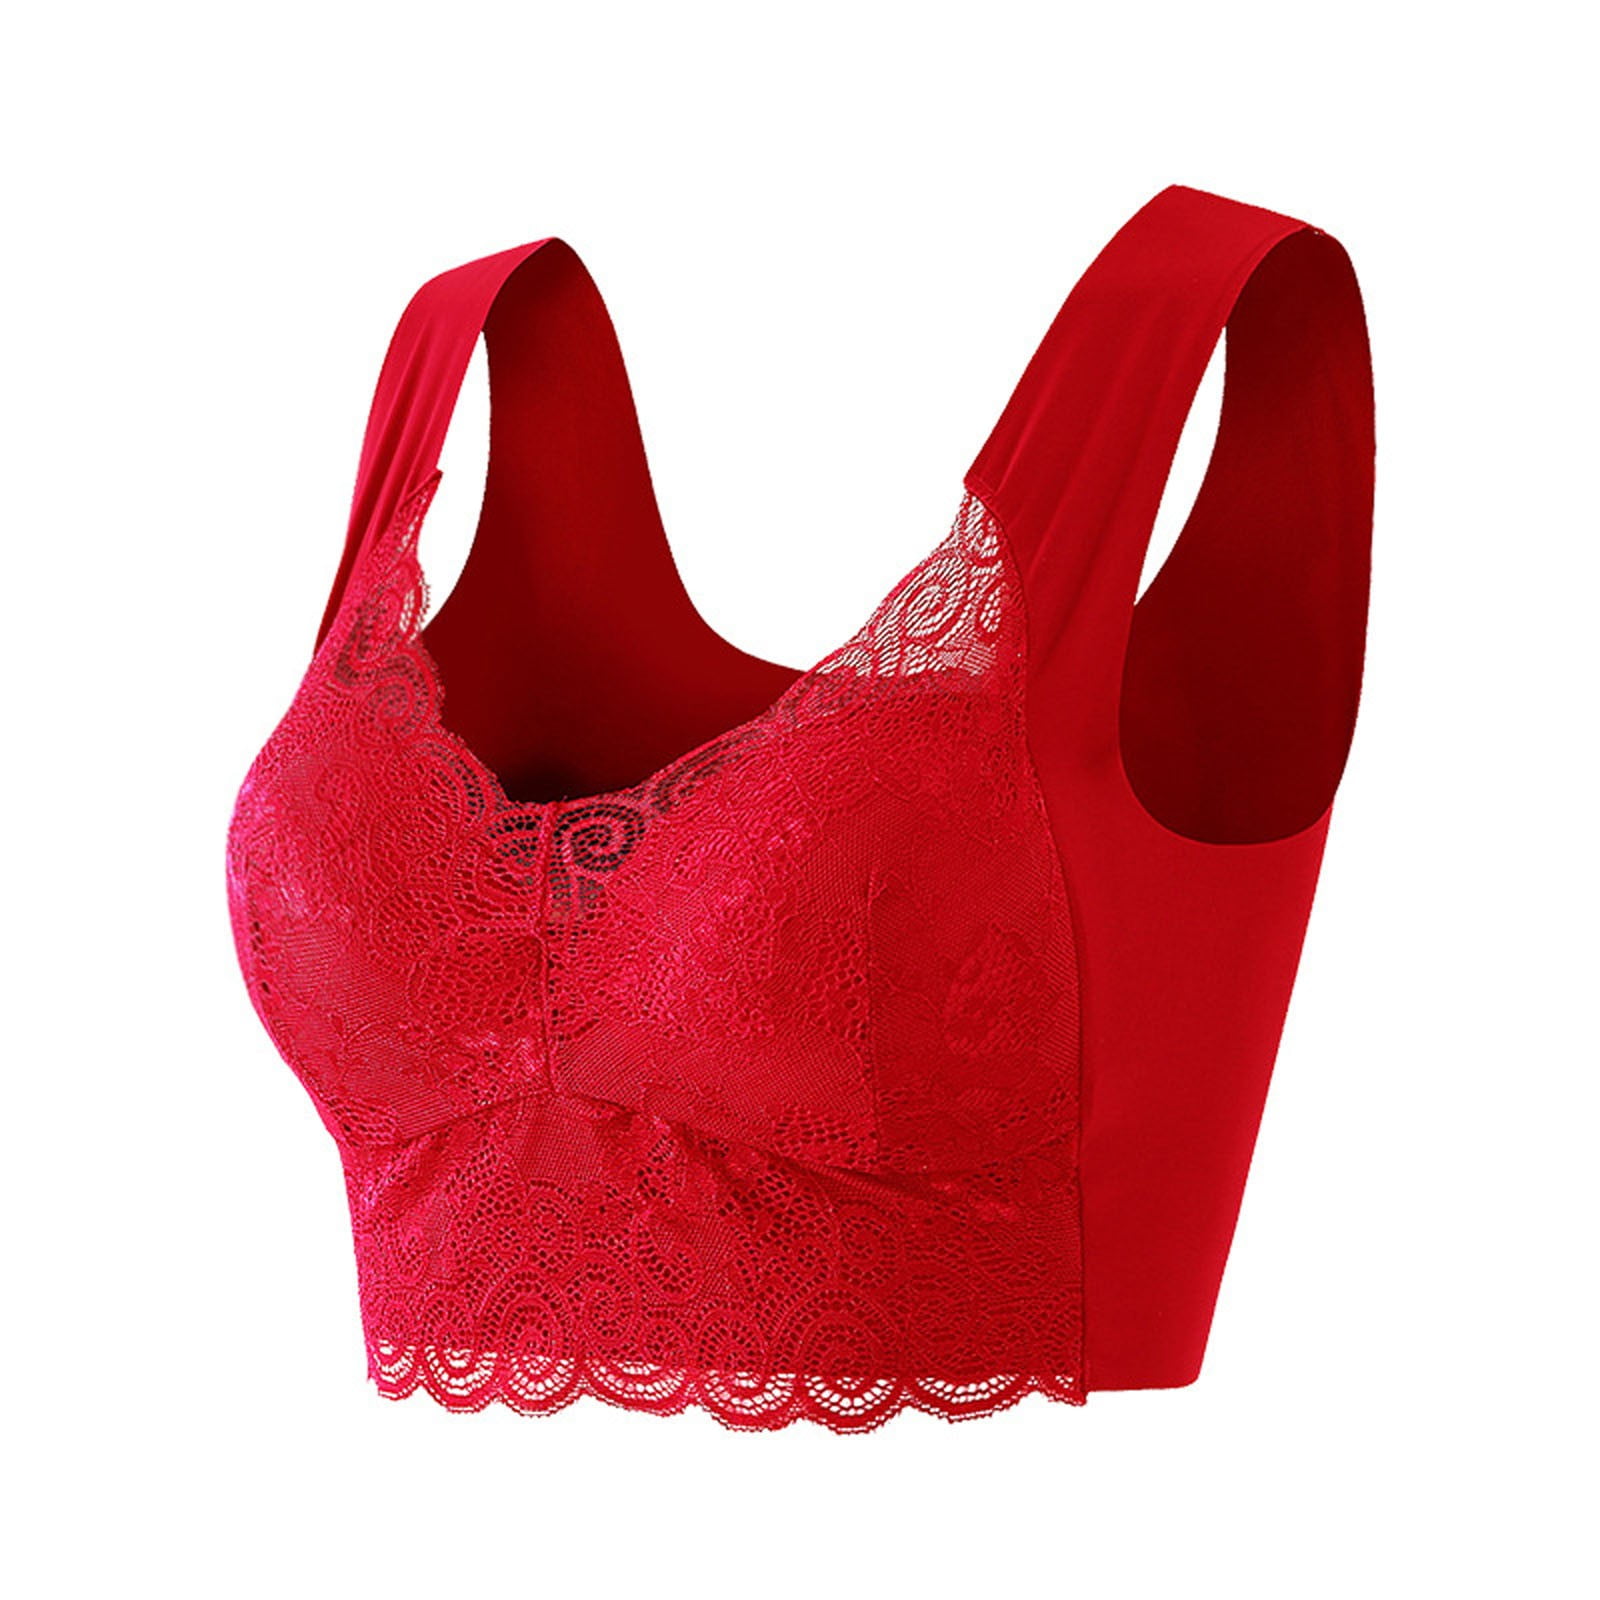 TQWQT Pure Comfort Lace Bralette, Padded Wireless Bra, Convertible Longline  Halter Bralette with Soft Foam Cups